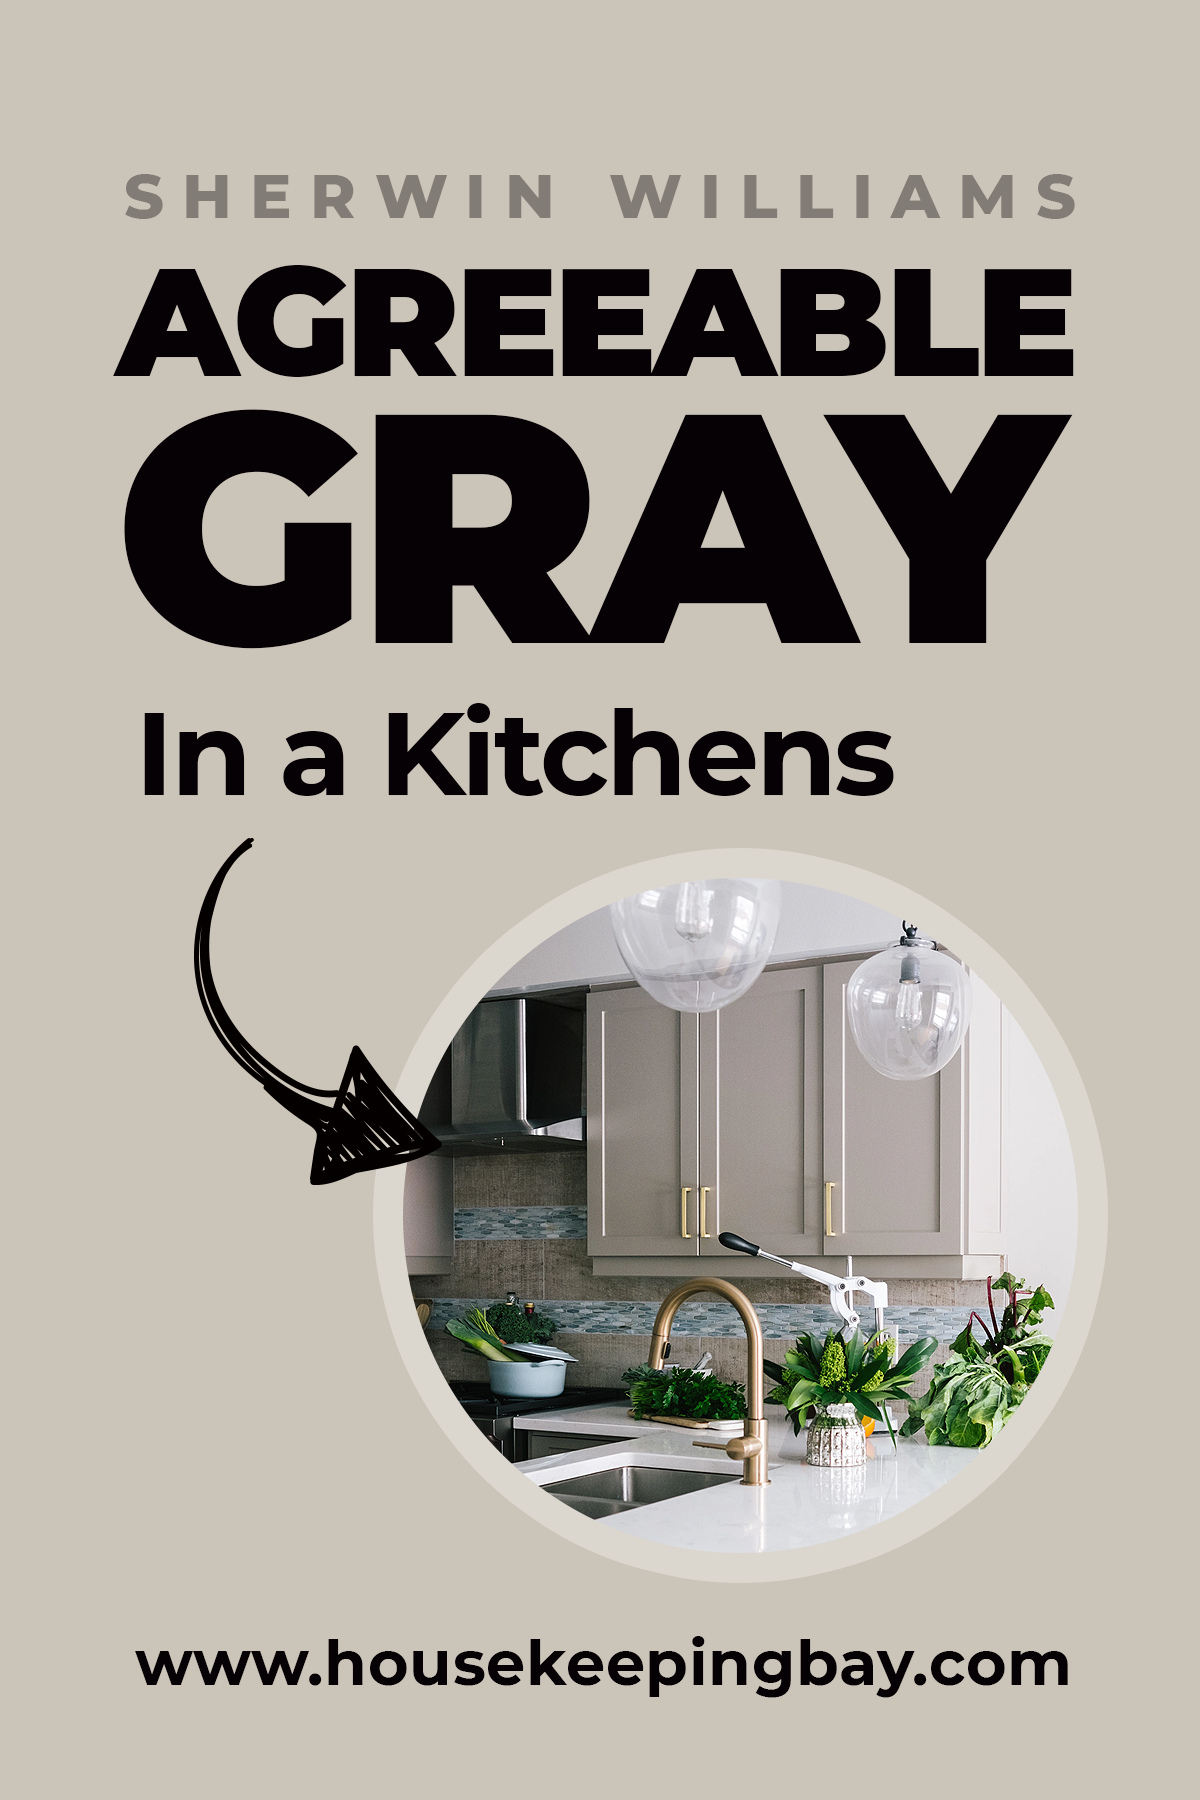 Agreeable Gray in a Kitchens